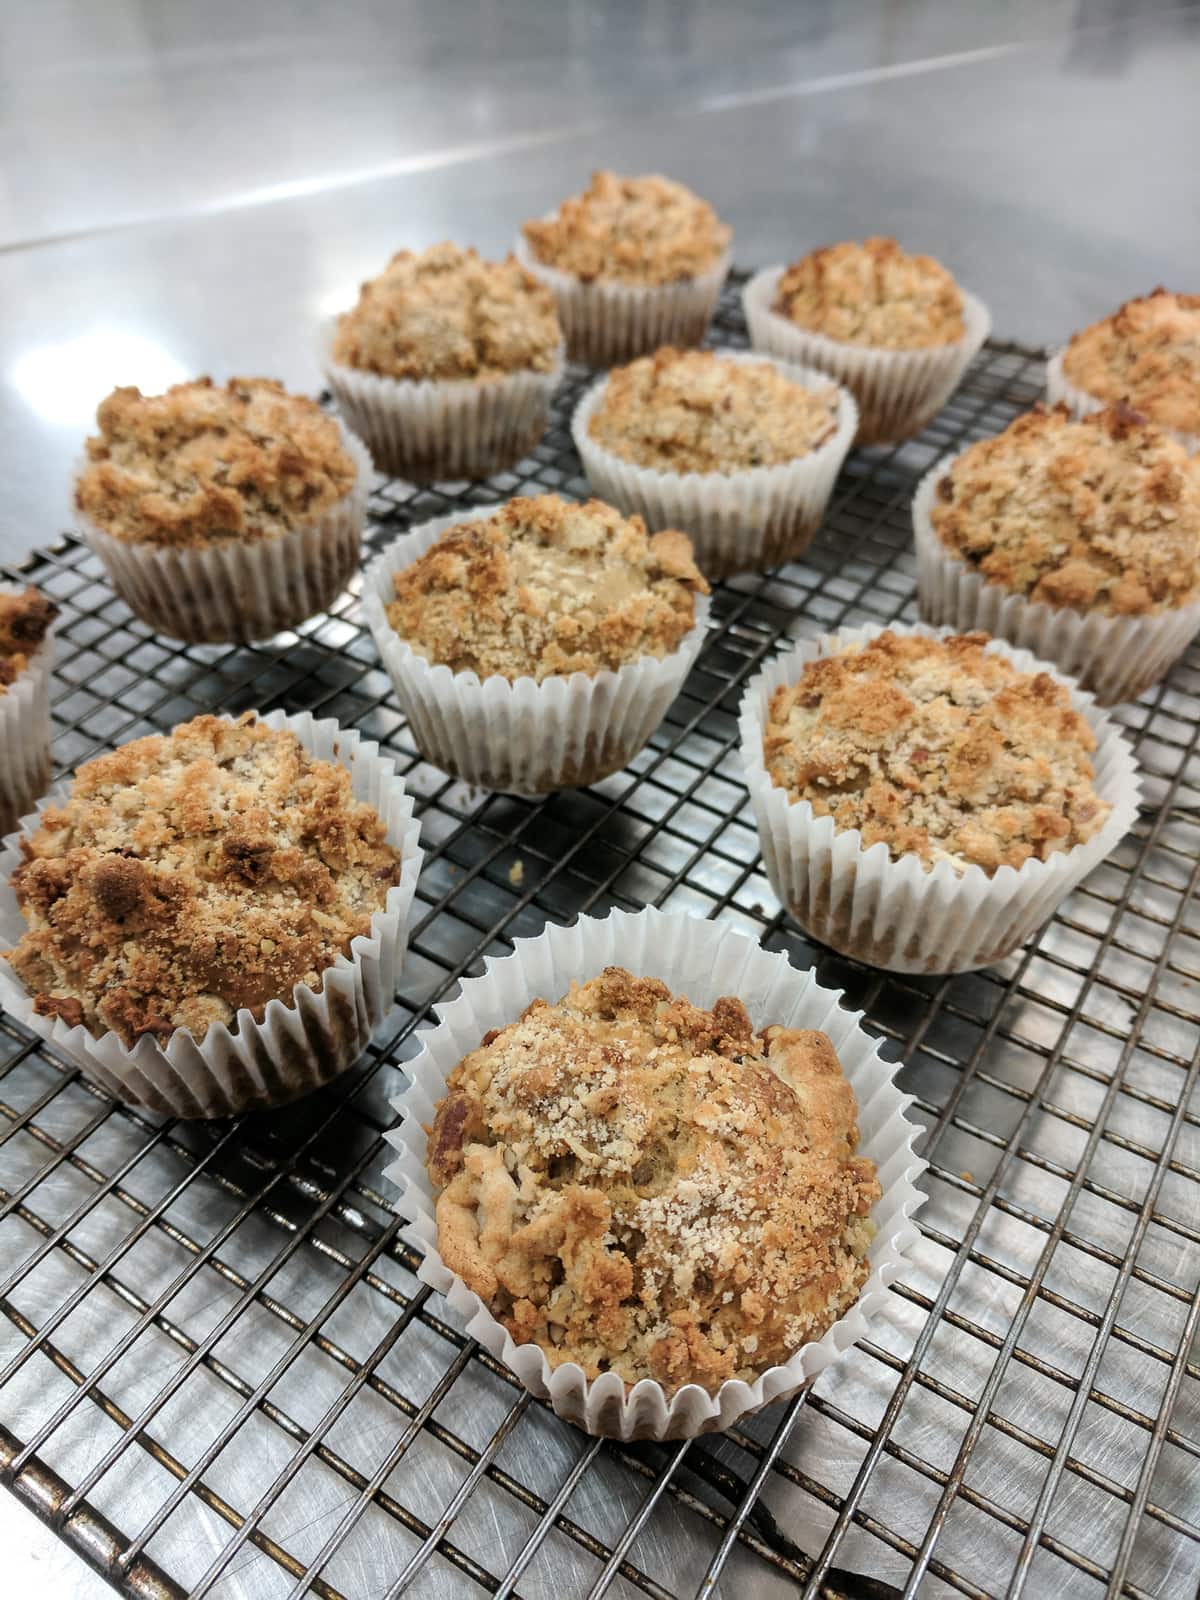 Apple muffin made with alternative sweeteners